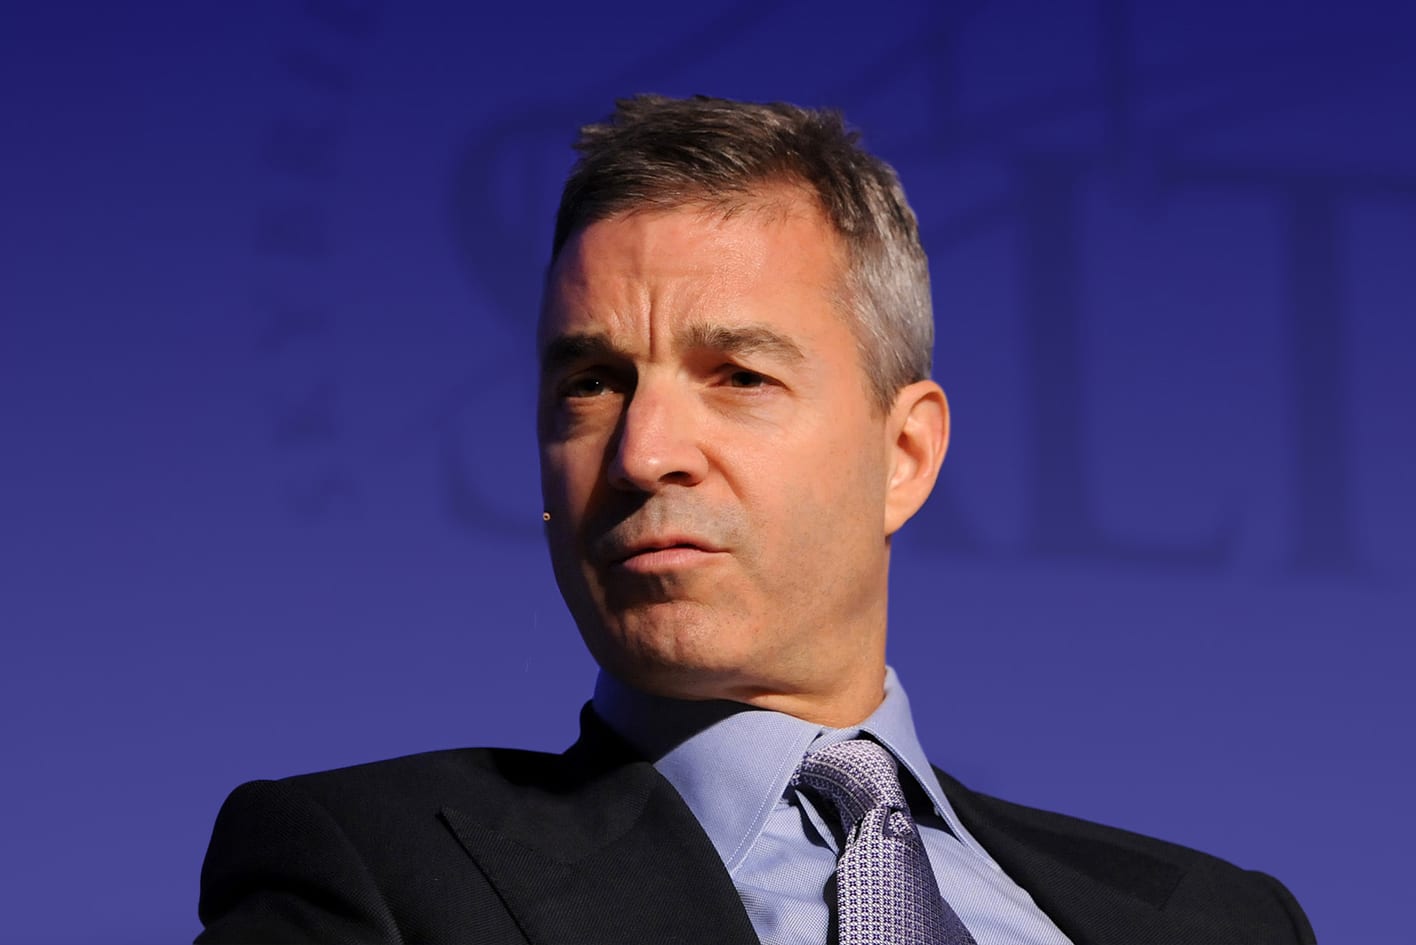 Dan Loeb says he's willing to wage a proxy fight against Bath & Body Works if necessary